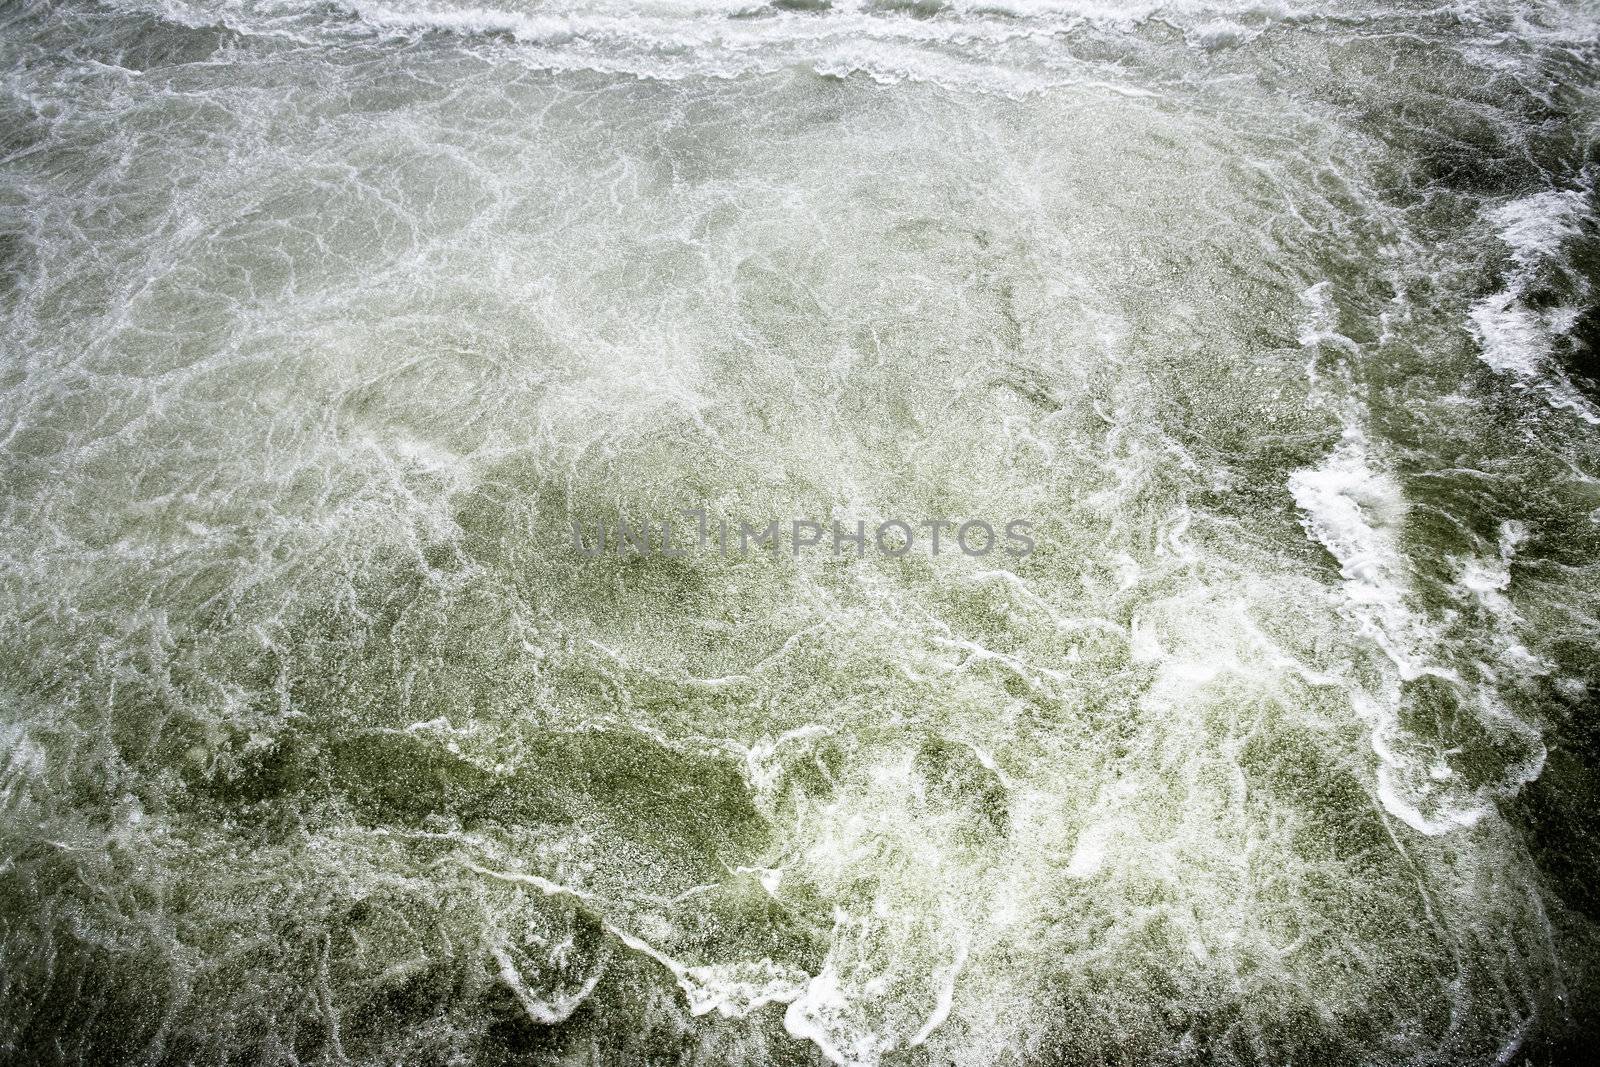 A bubbling water background abstract